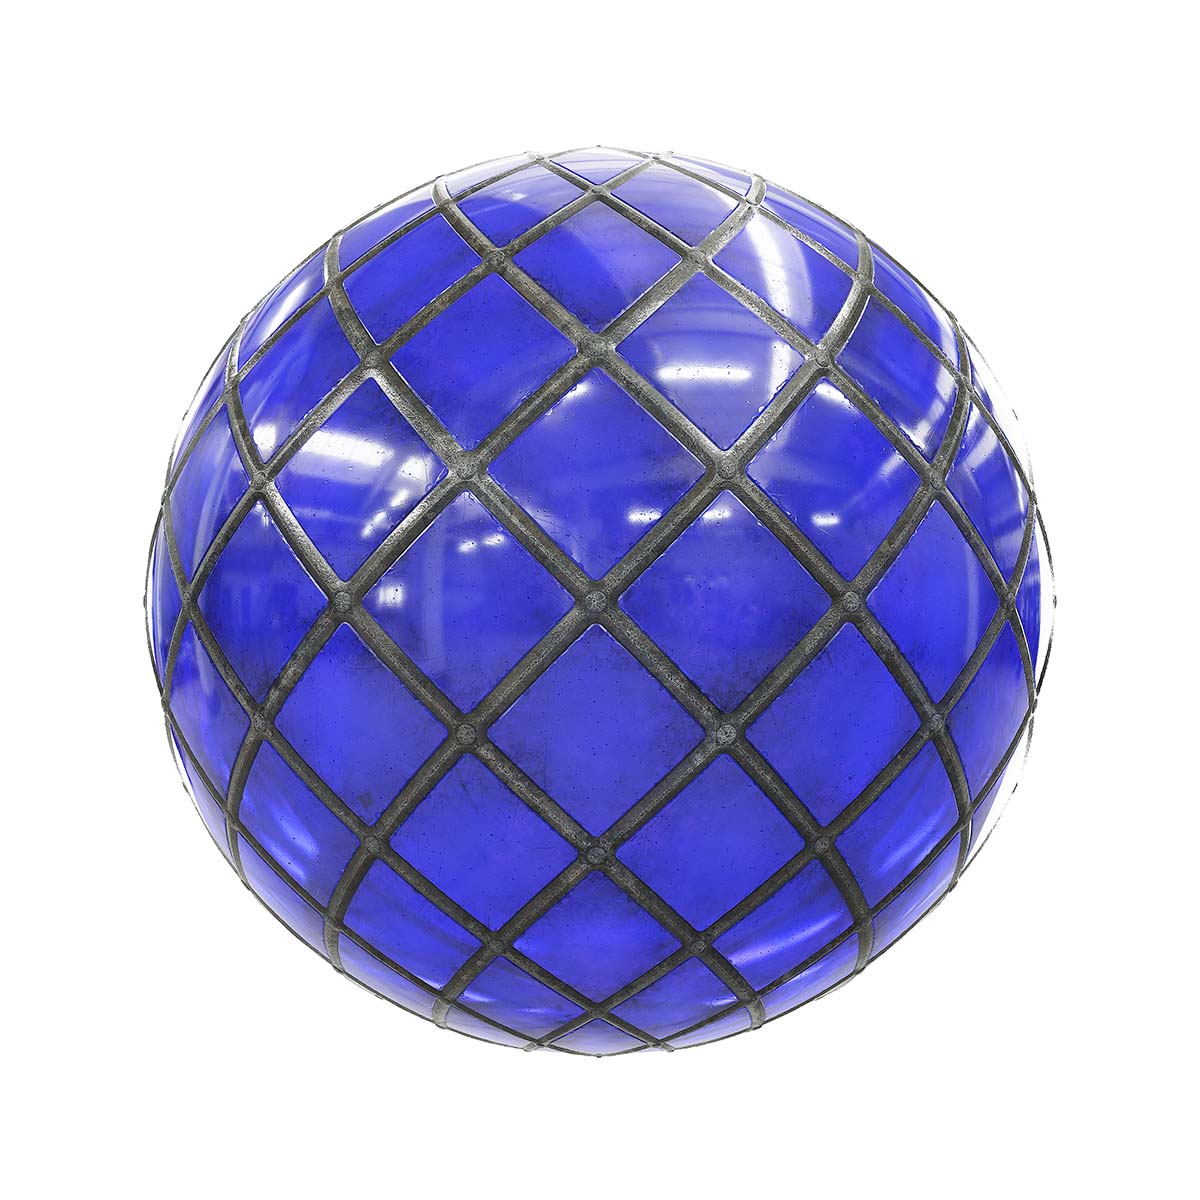 Blue Stained Glass PBR Texture